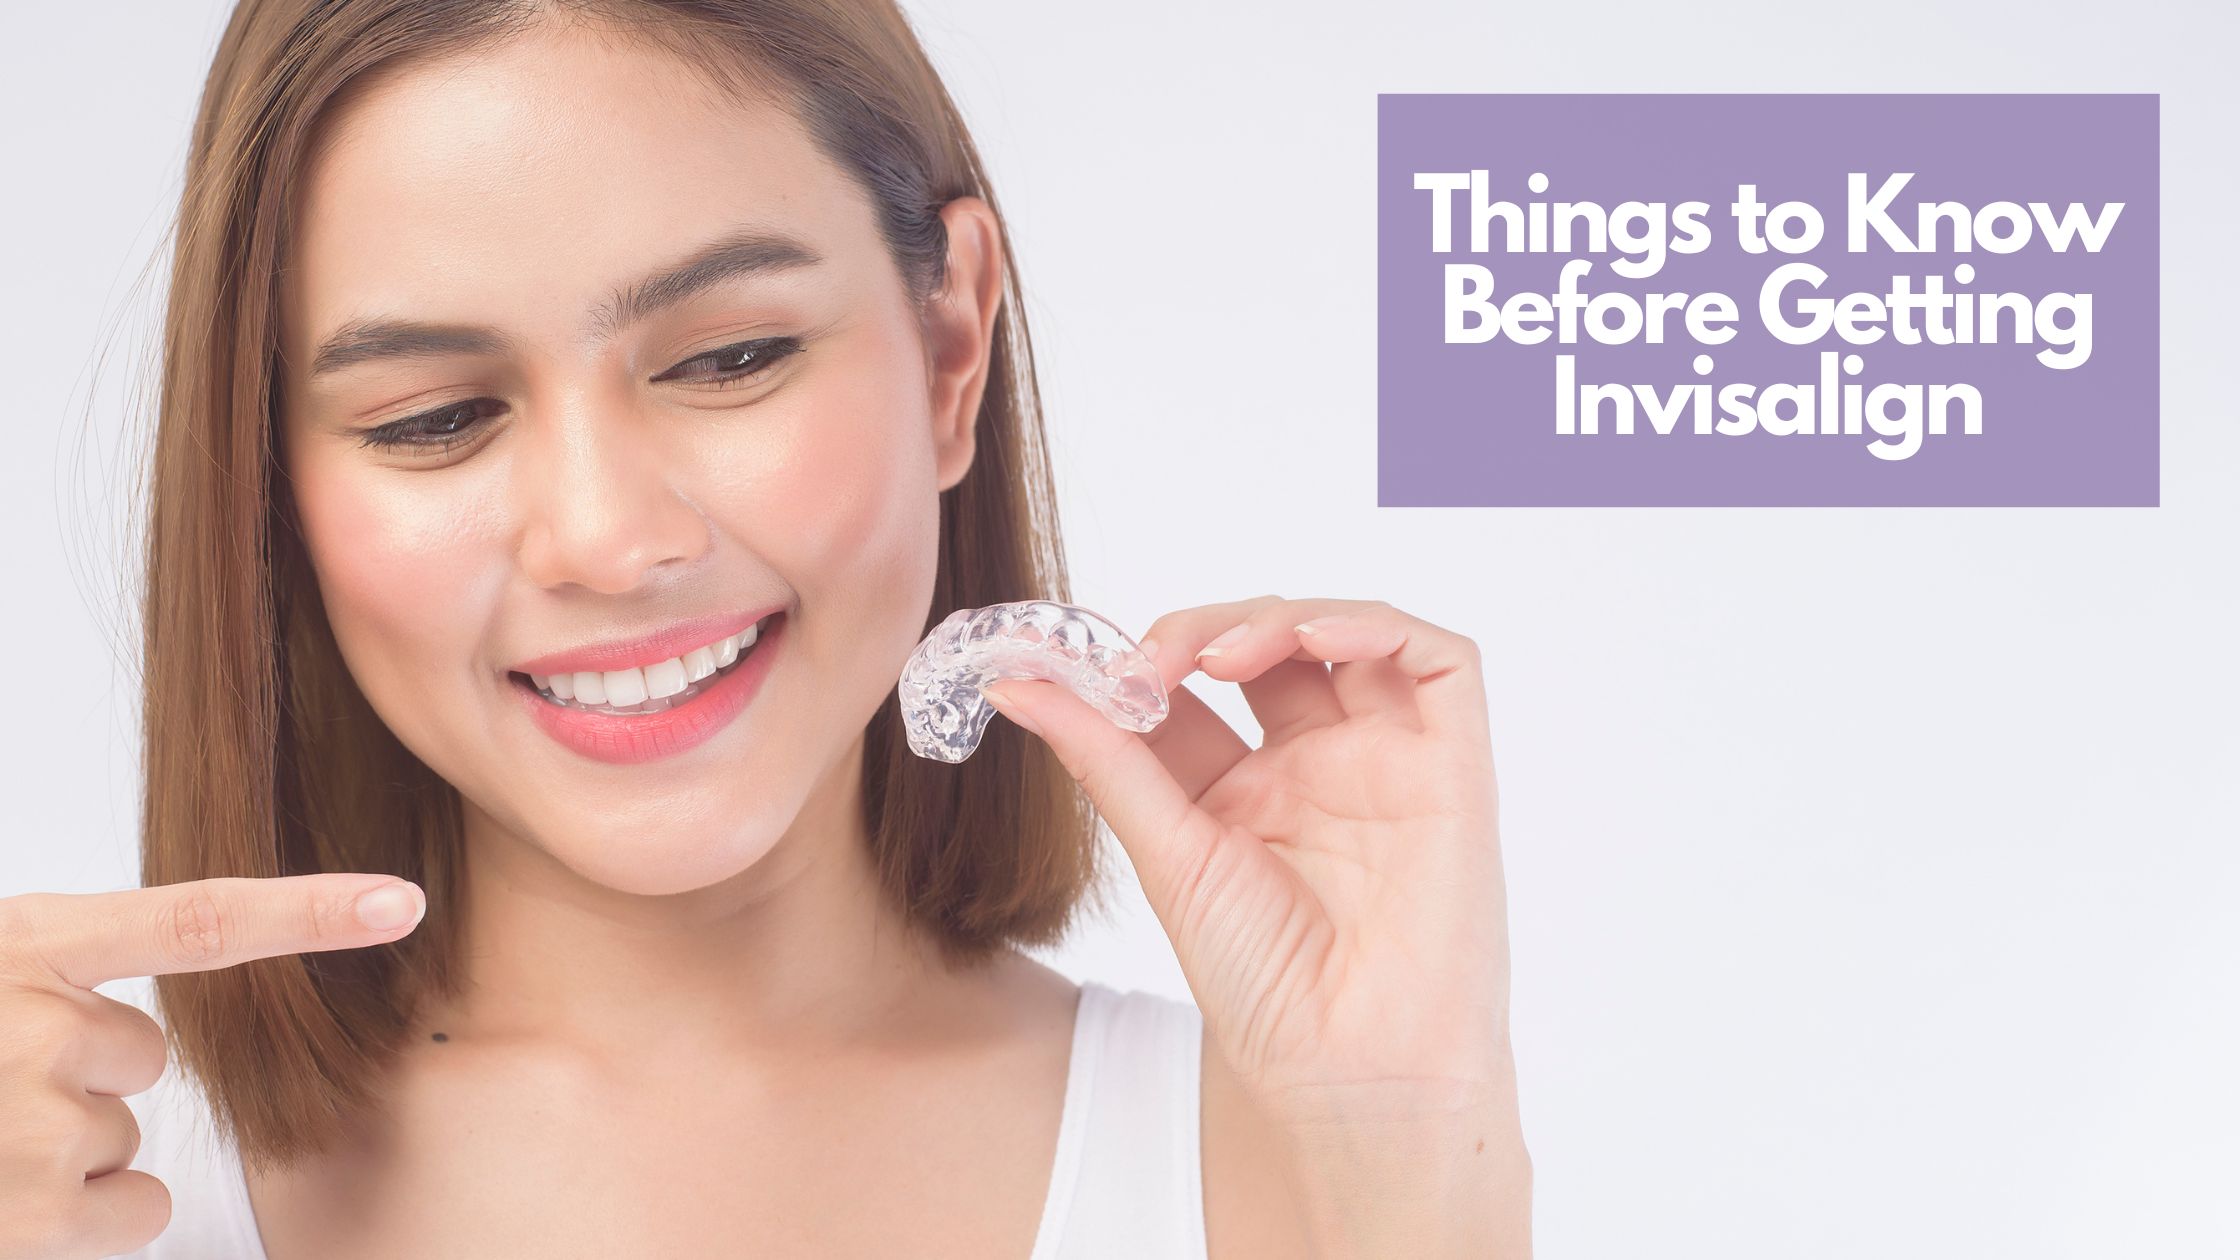 Things to Know Before Getting Invisalign